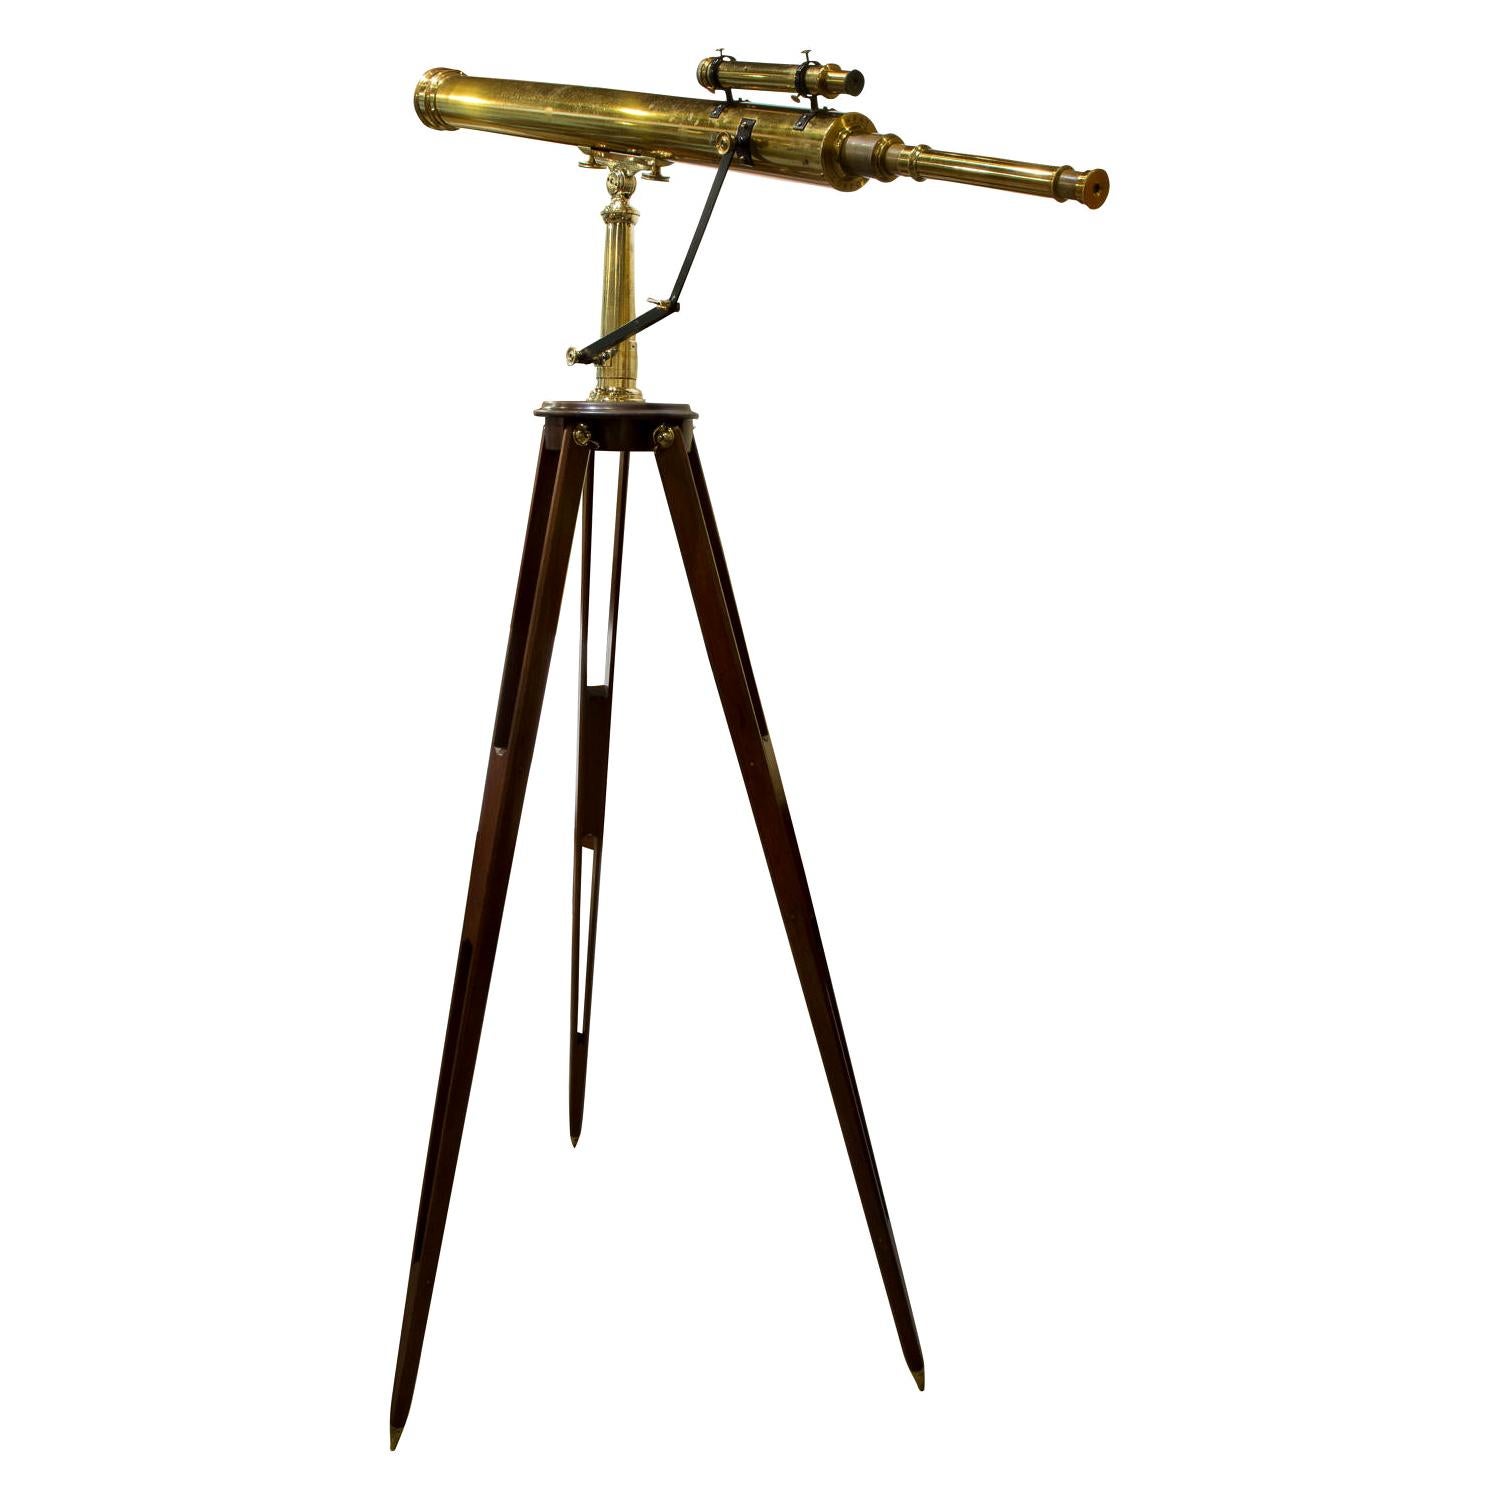 Refracting Telescope by Wray of London, circa 1880